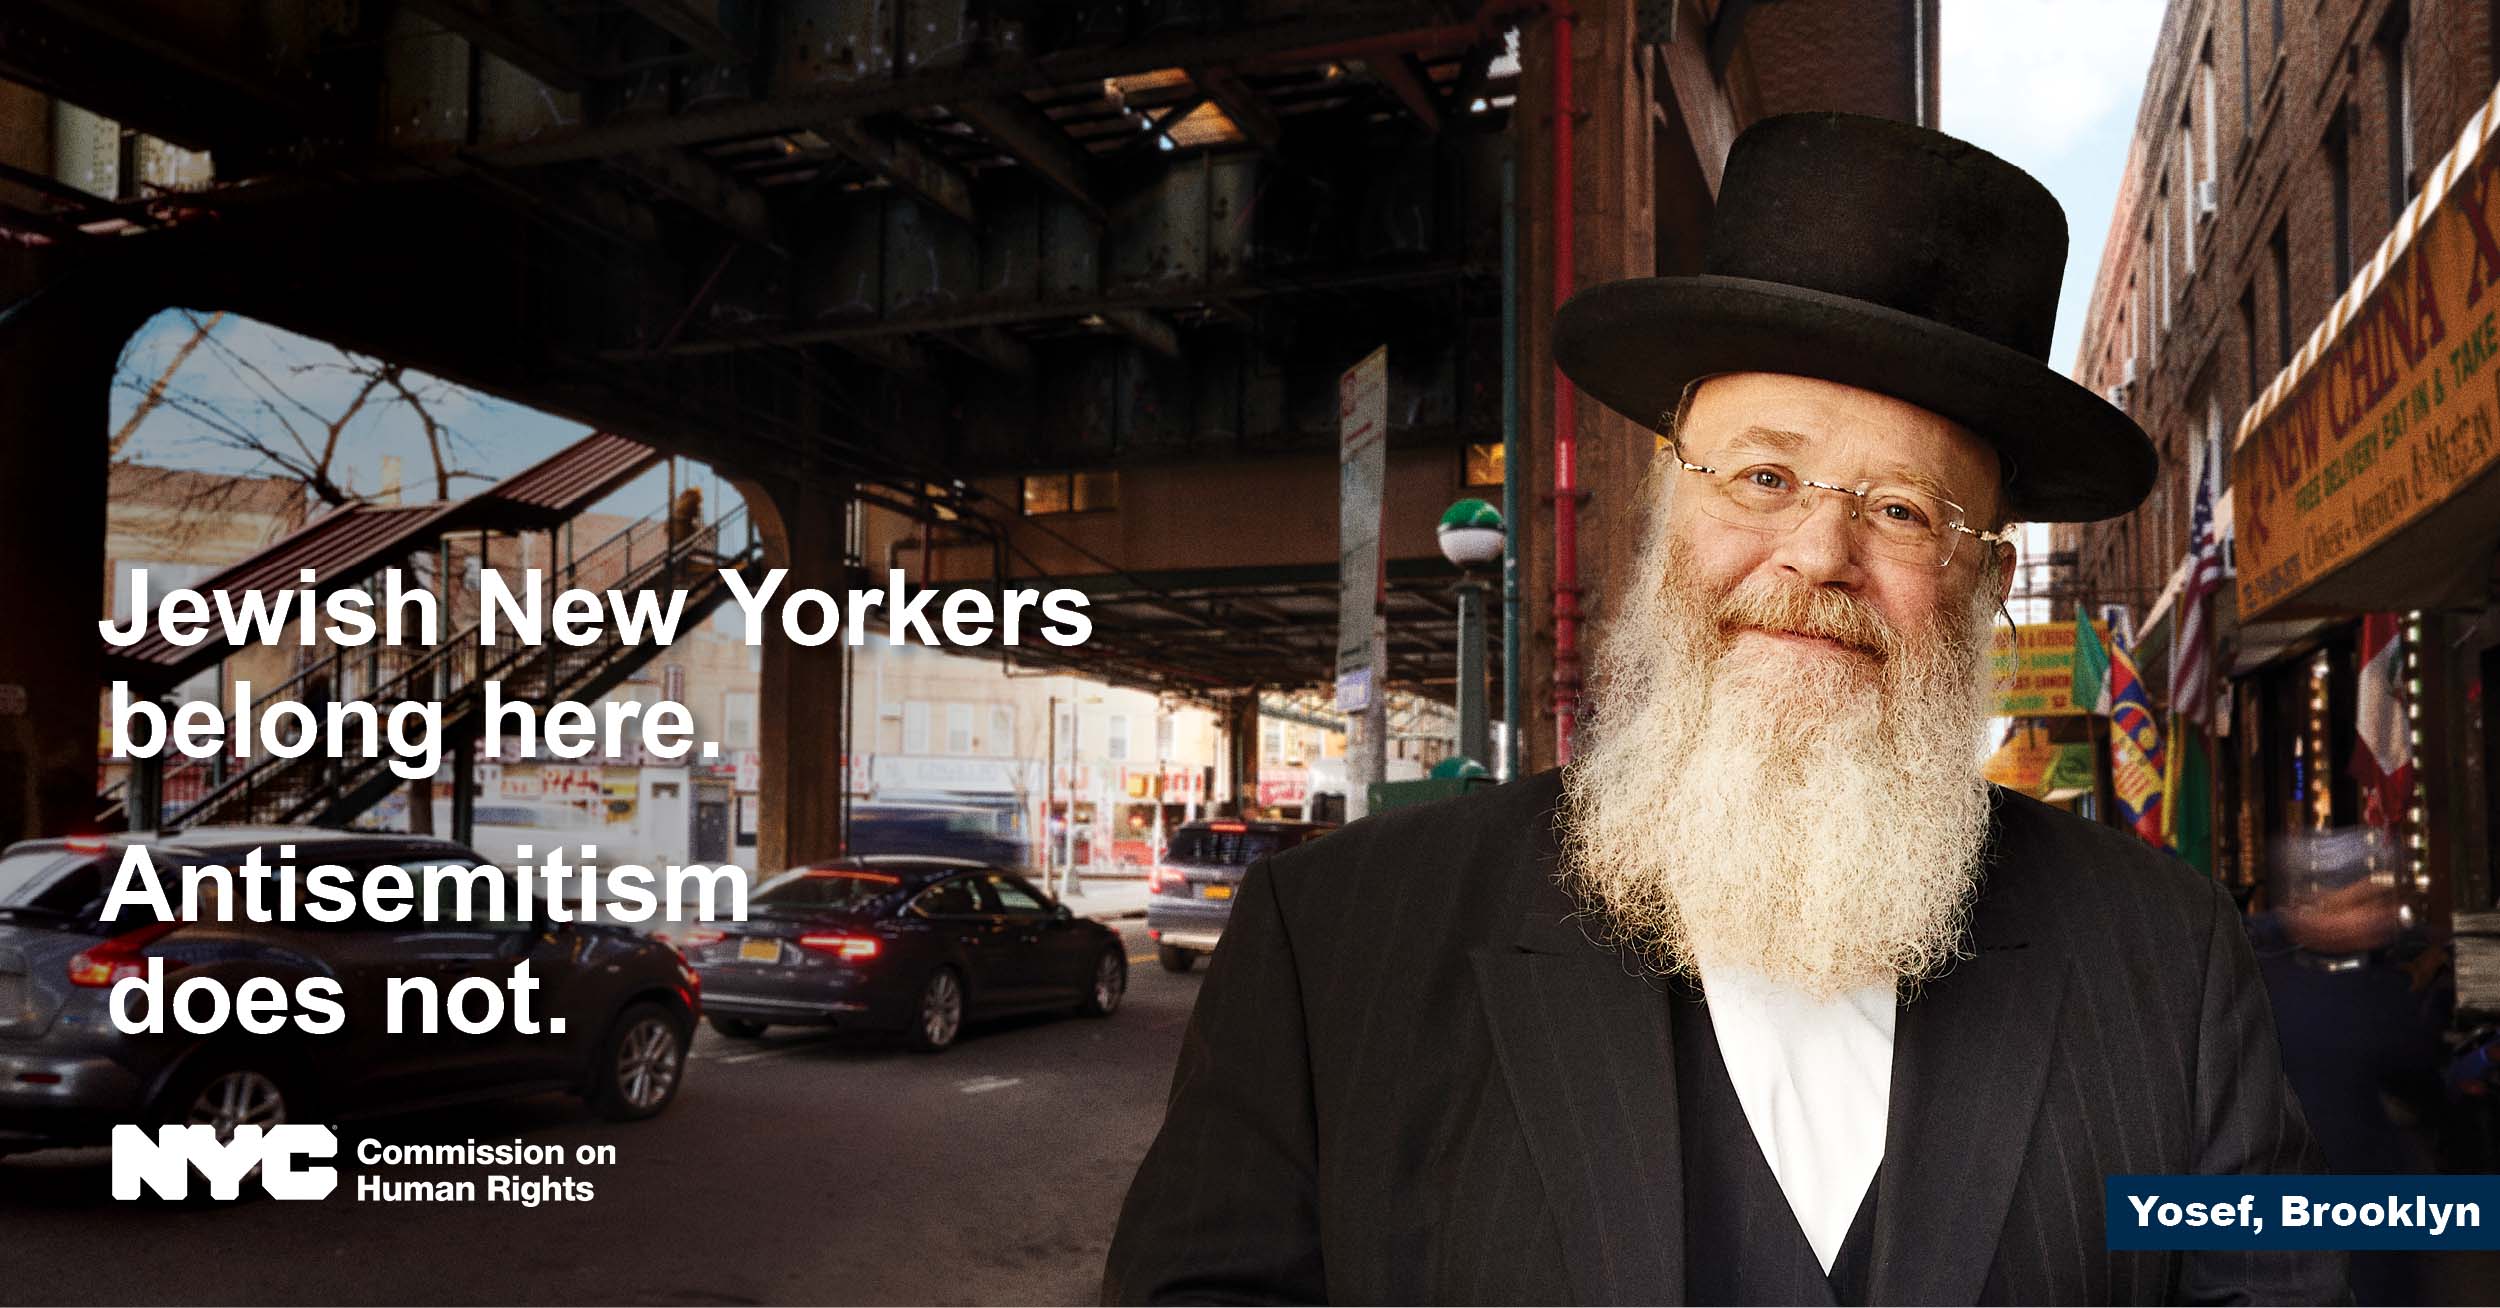 Man in traditional Orthodox Jewish dress looking straight ahead with NYC bridge in the background.  Text reads, “Jewish New Yorkers belong here. Antisemitism does not.” NYC logo is at the bottom, with NYC Commission on Human Rights.  On the bottom-right, text reads “Yosef, Brooklyn.”